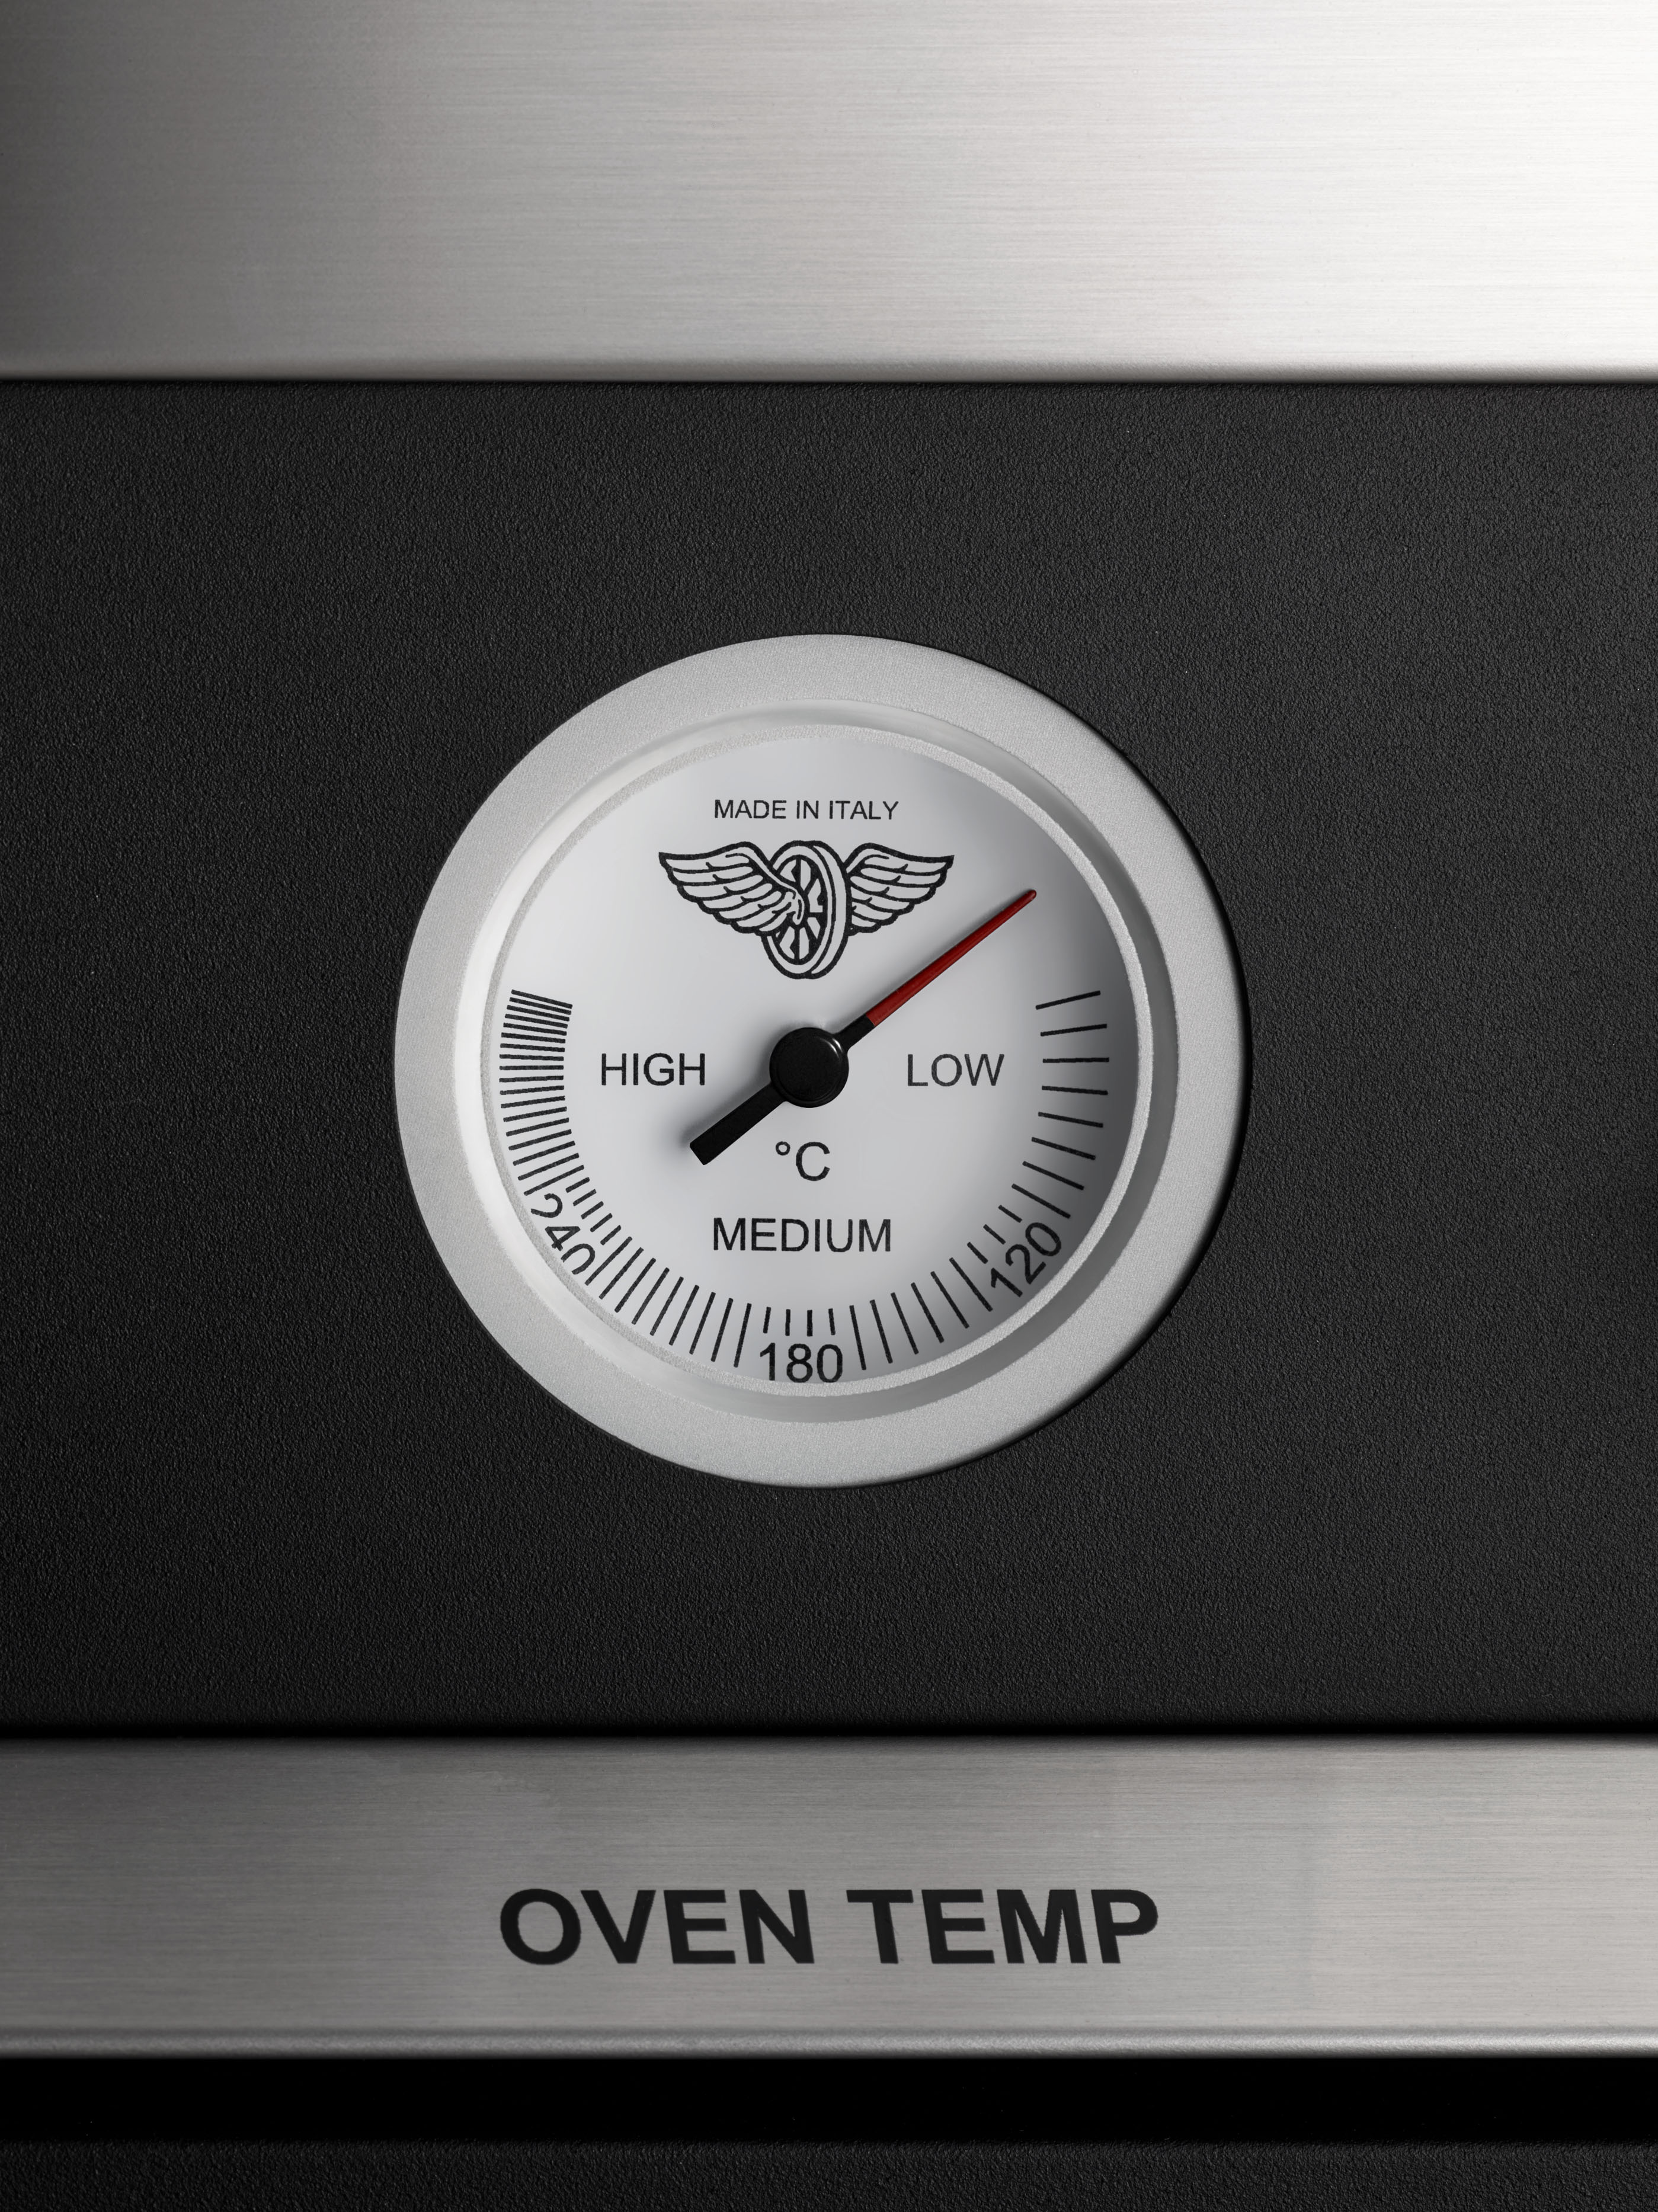 Foto: 2015 Heritage thermometer close up